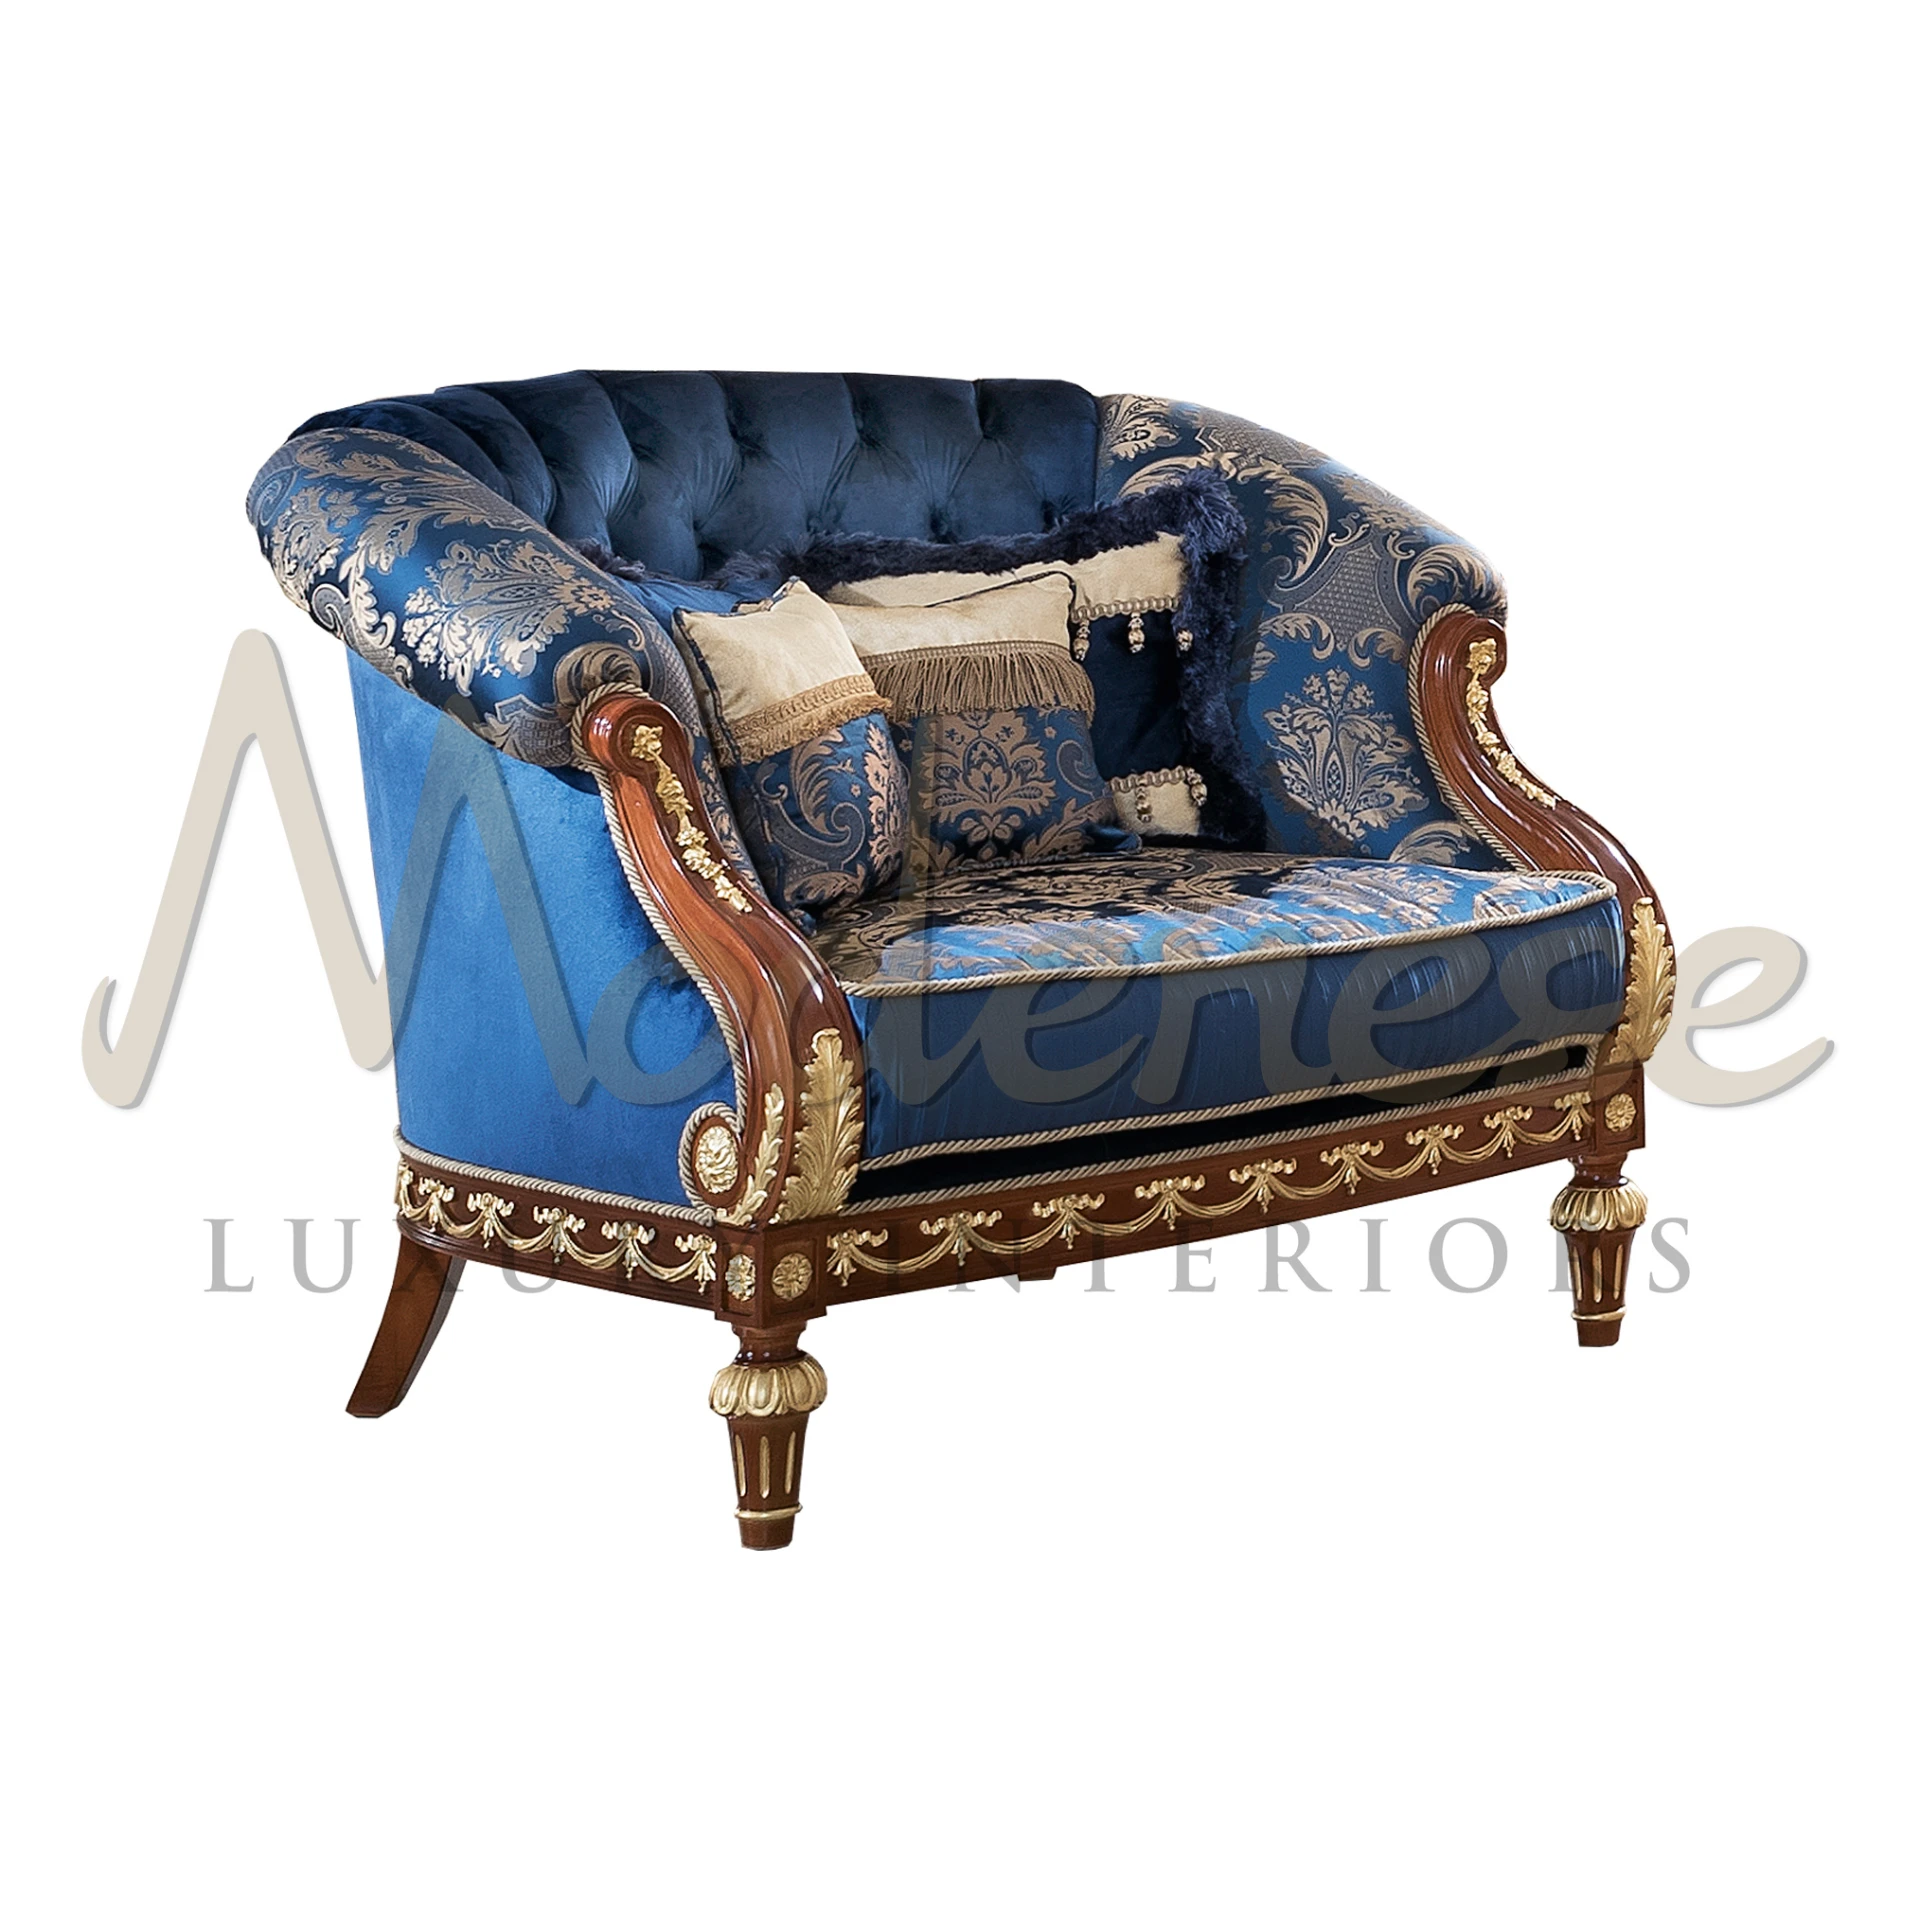 Luxury Royal Classic Armchair: Timeless Elegance for Refined Interiors